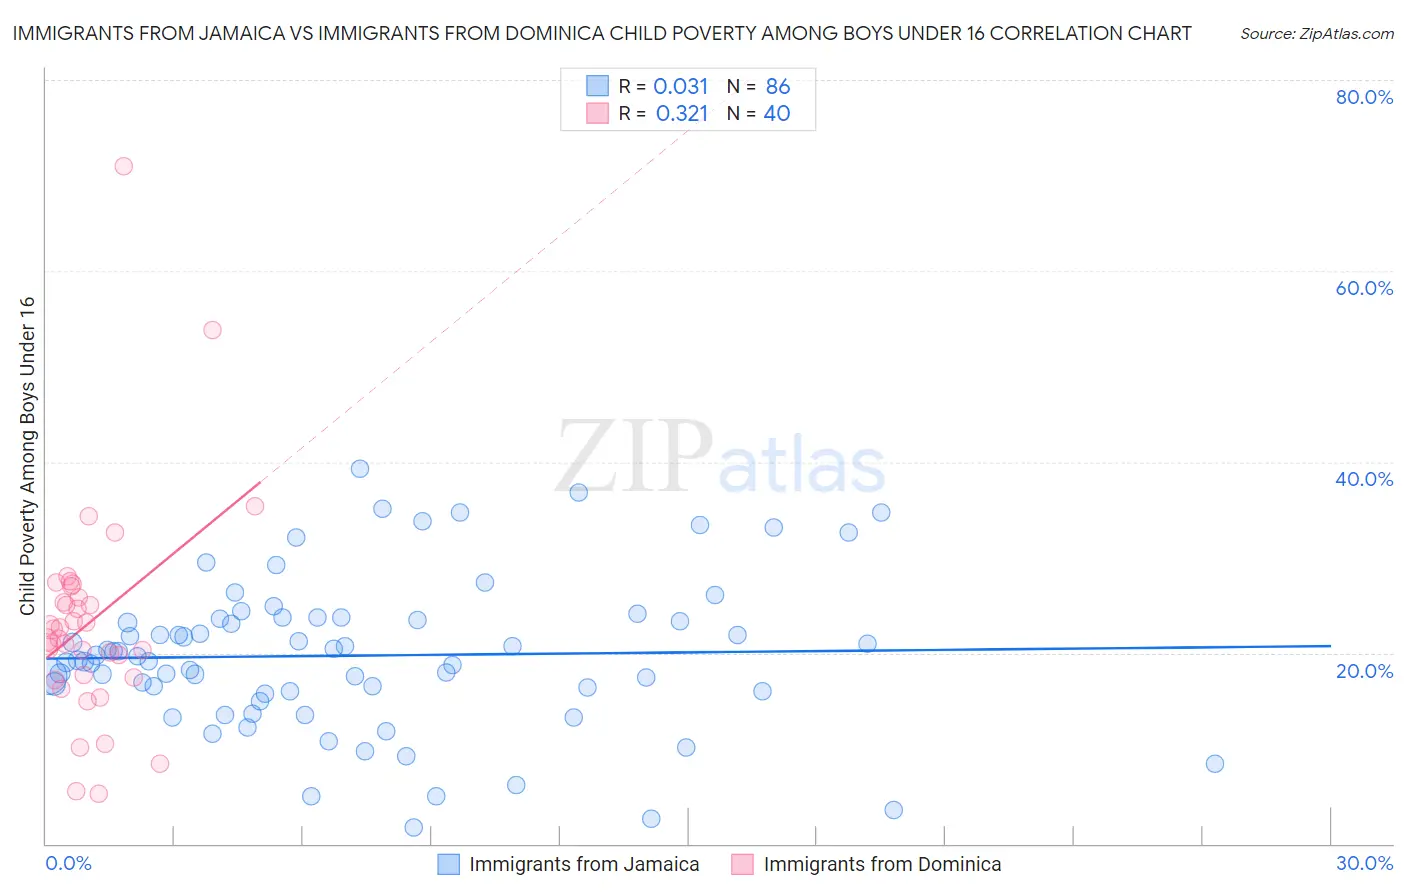 Immigrants from Jamaica vs Immigrants from Dominica Child Poverty Among Boys Under 16